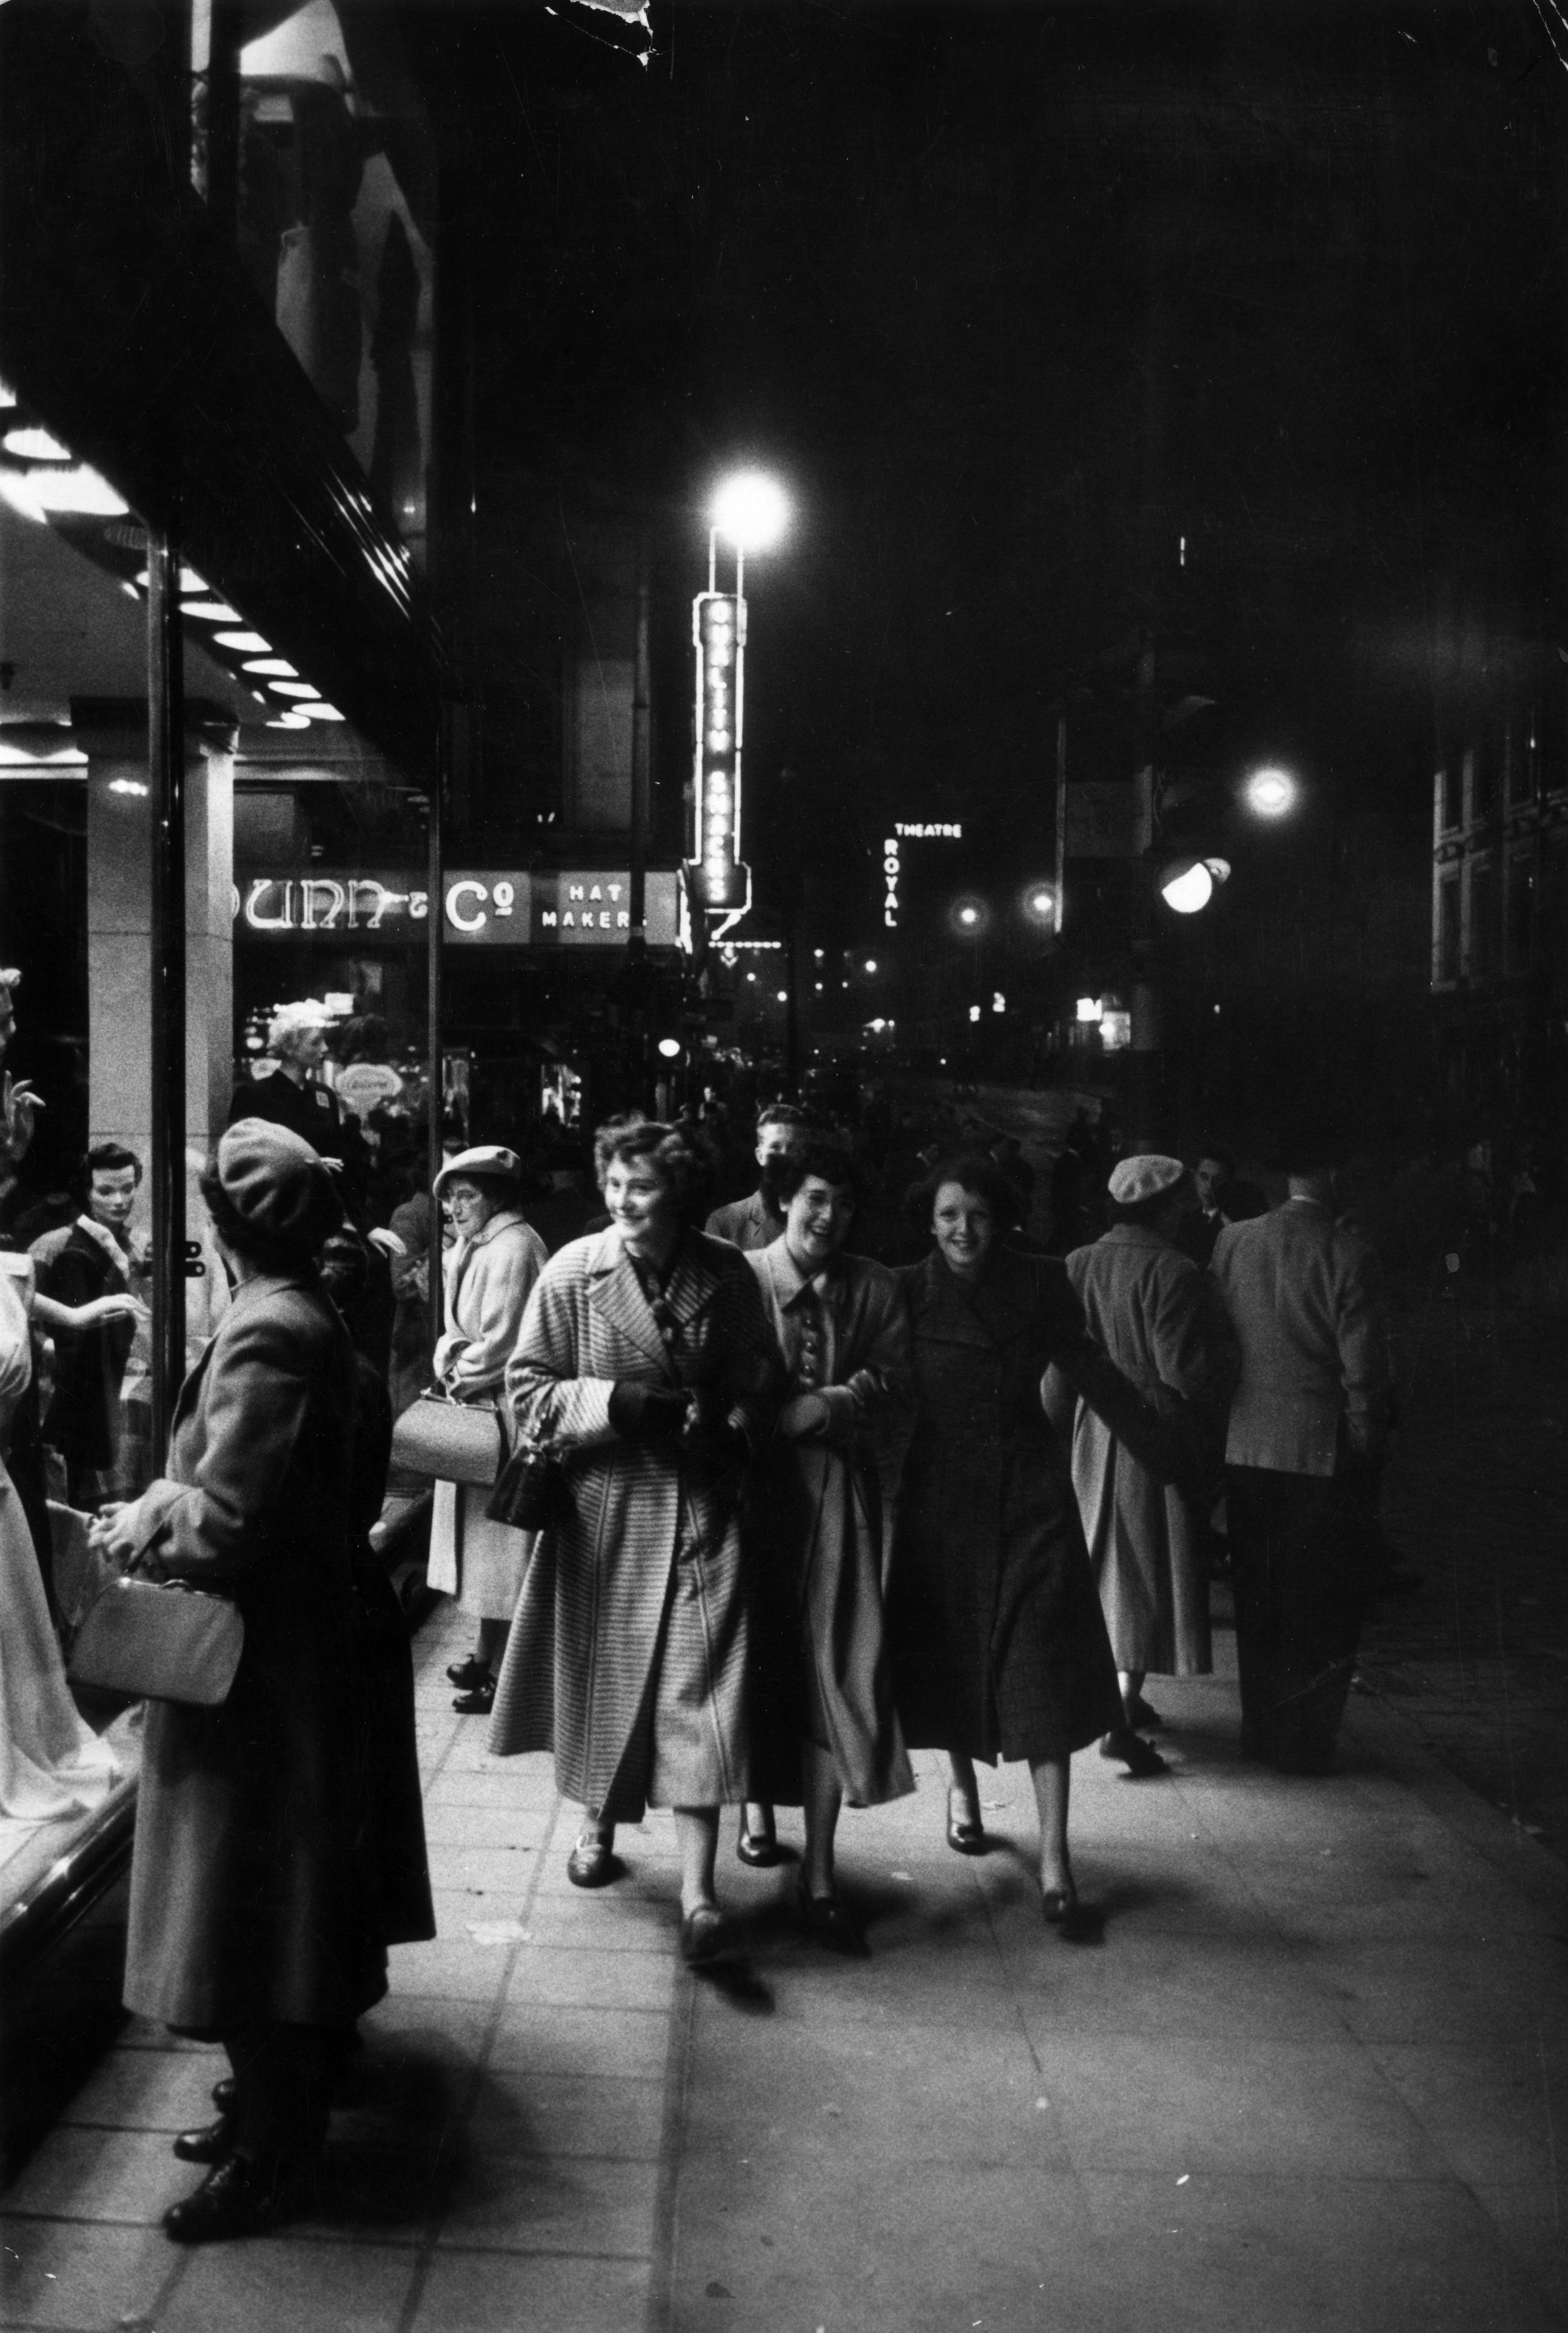 October 17 1953:  Three women enjoy window shopping among the Saturday night crowds on Sauchiehall street, Glasgow. Original Publication: Picture Post - 6754 - Glasgow: How A City Is Run - pub. 1953  (Photo by Haywood Magee/Picture Post/Hulton Archive/Getty Images)